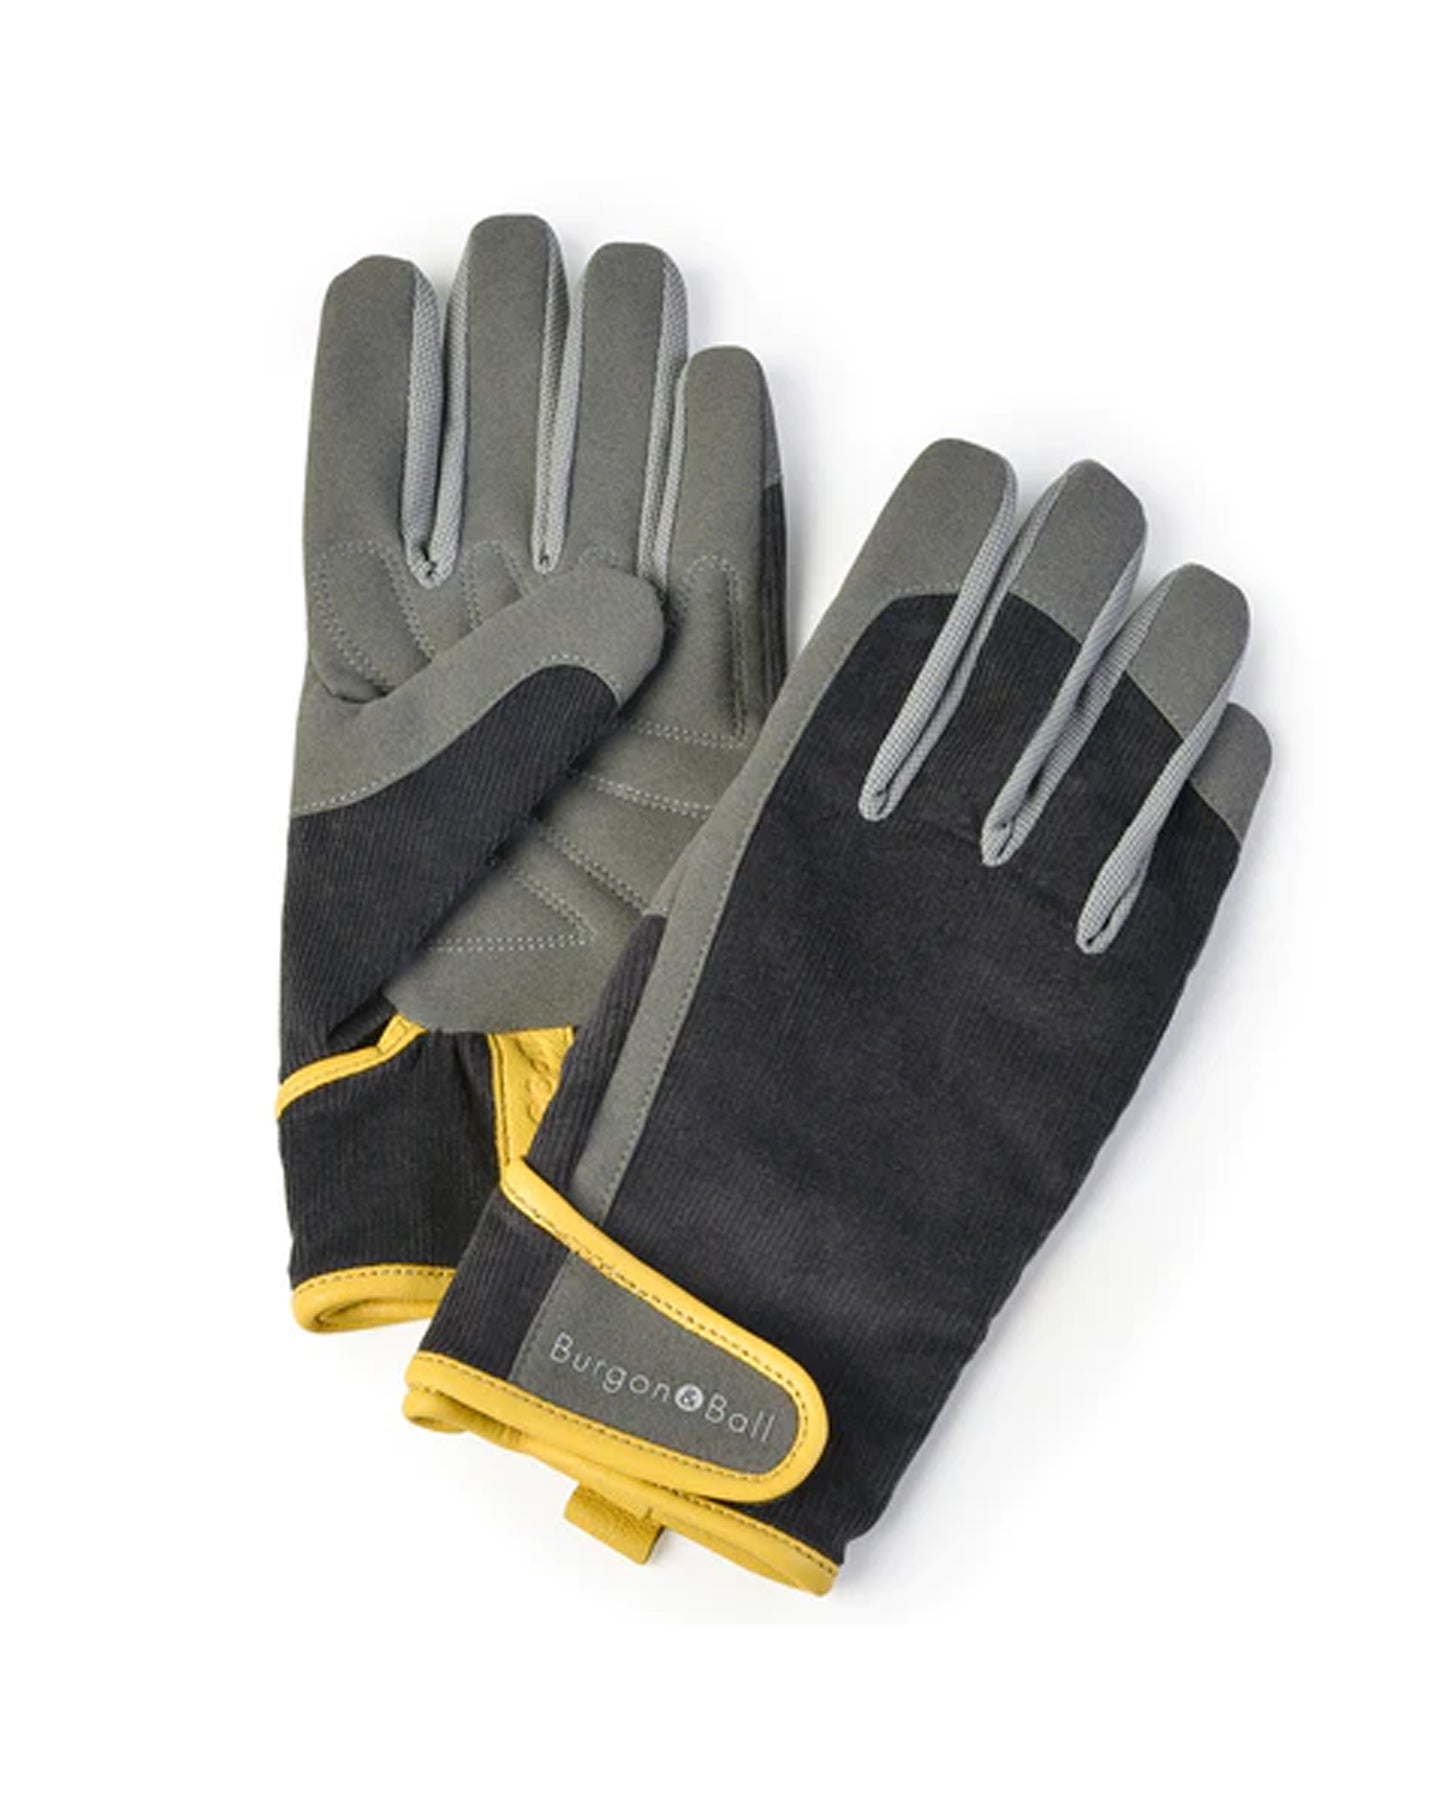 Dig-the-Glove in Grey Corduroy